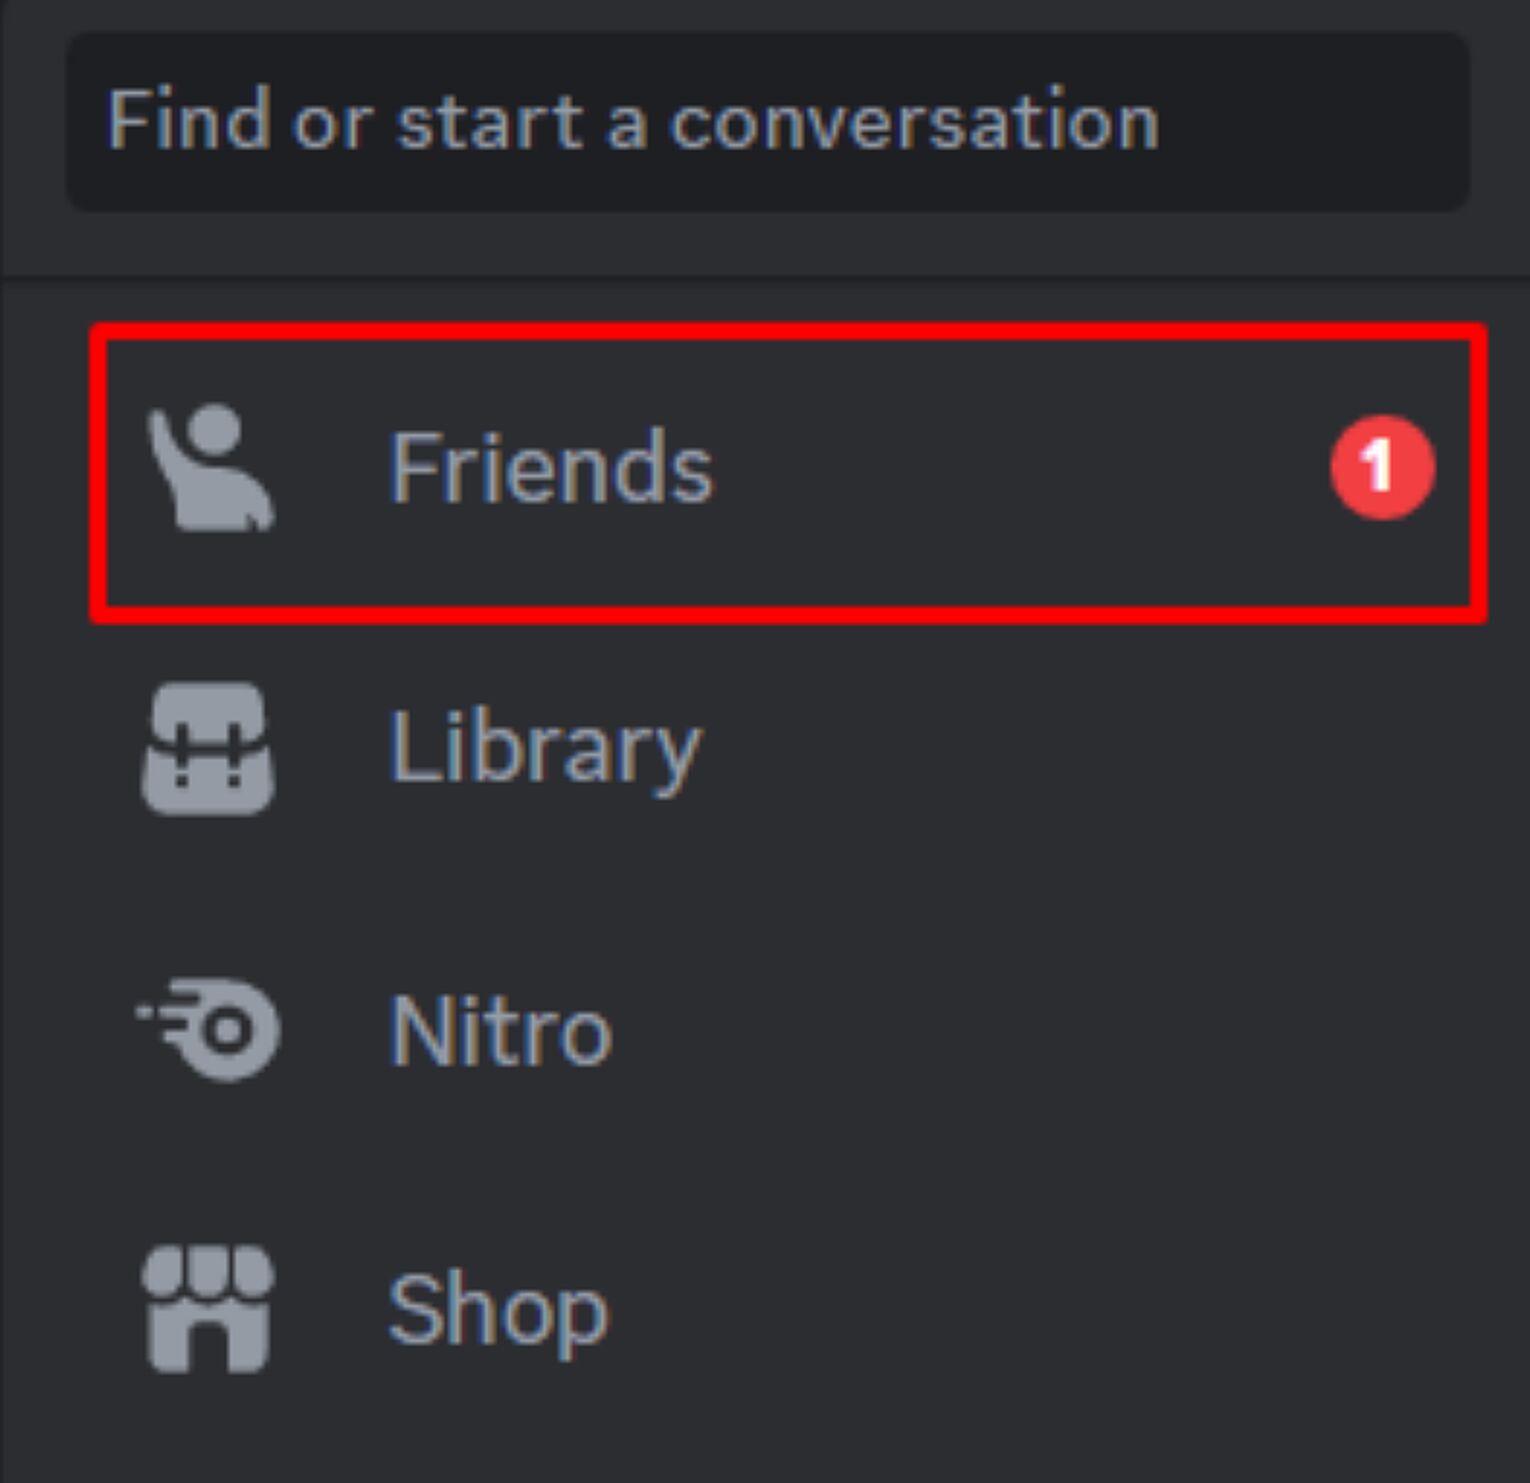 Step 2: Go To The “Friends” Tab On Discord